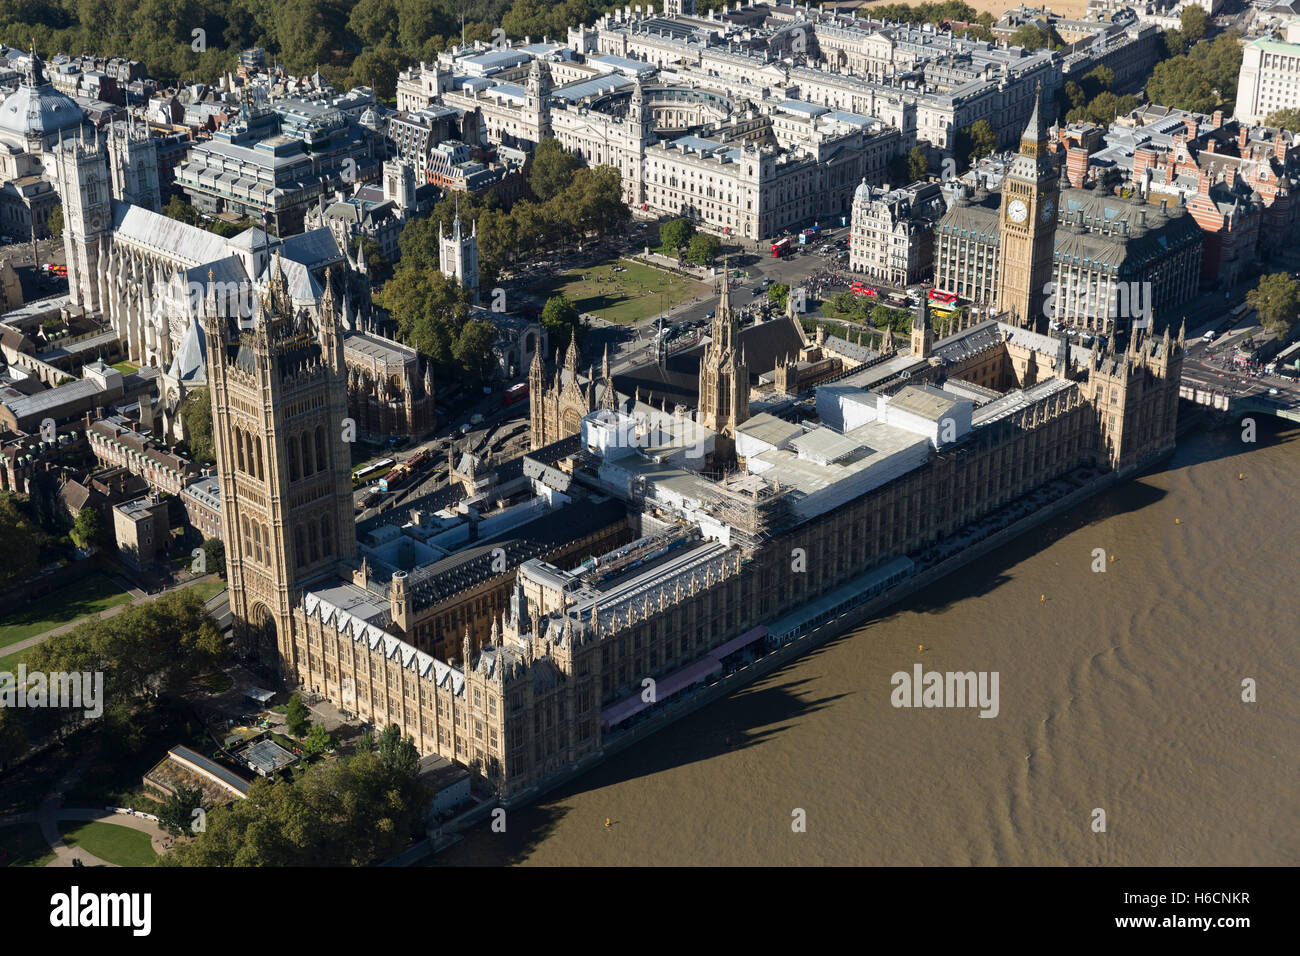 The Palace of Westminster is covered in scaffolding as repair work begins to fix the crumbling building. Stock Photo